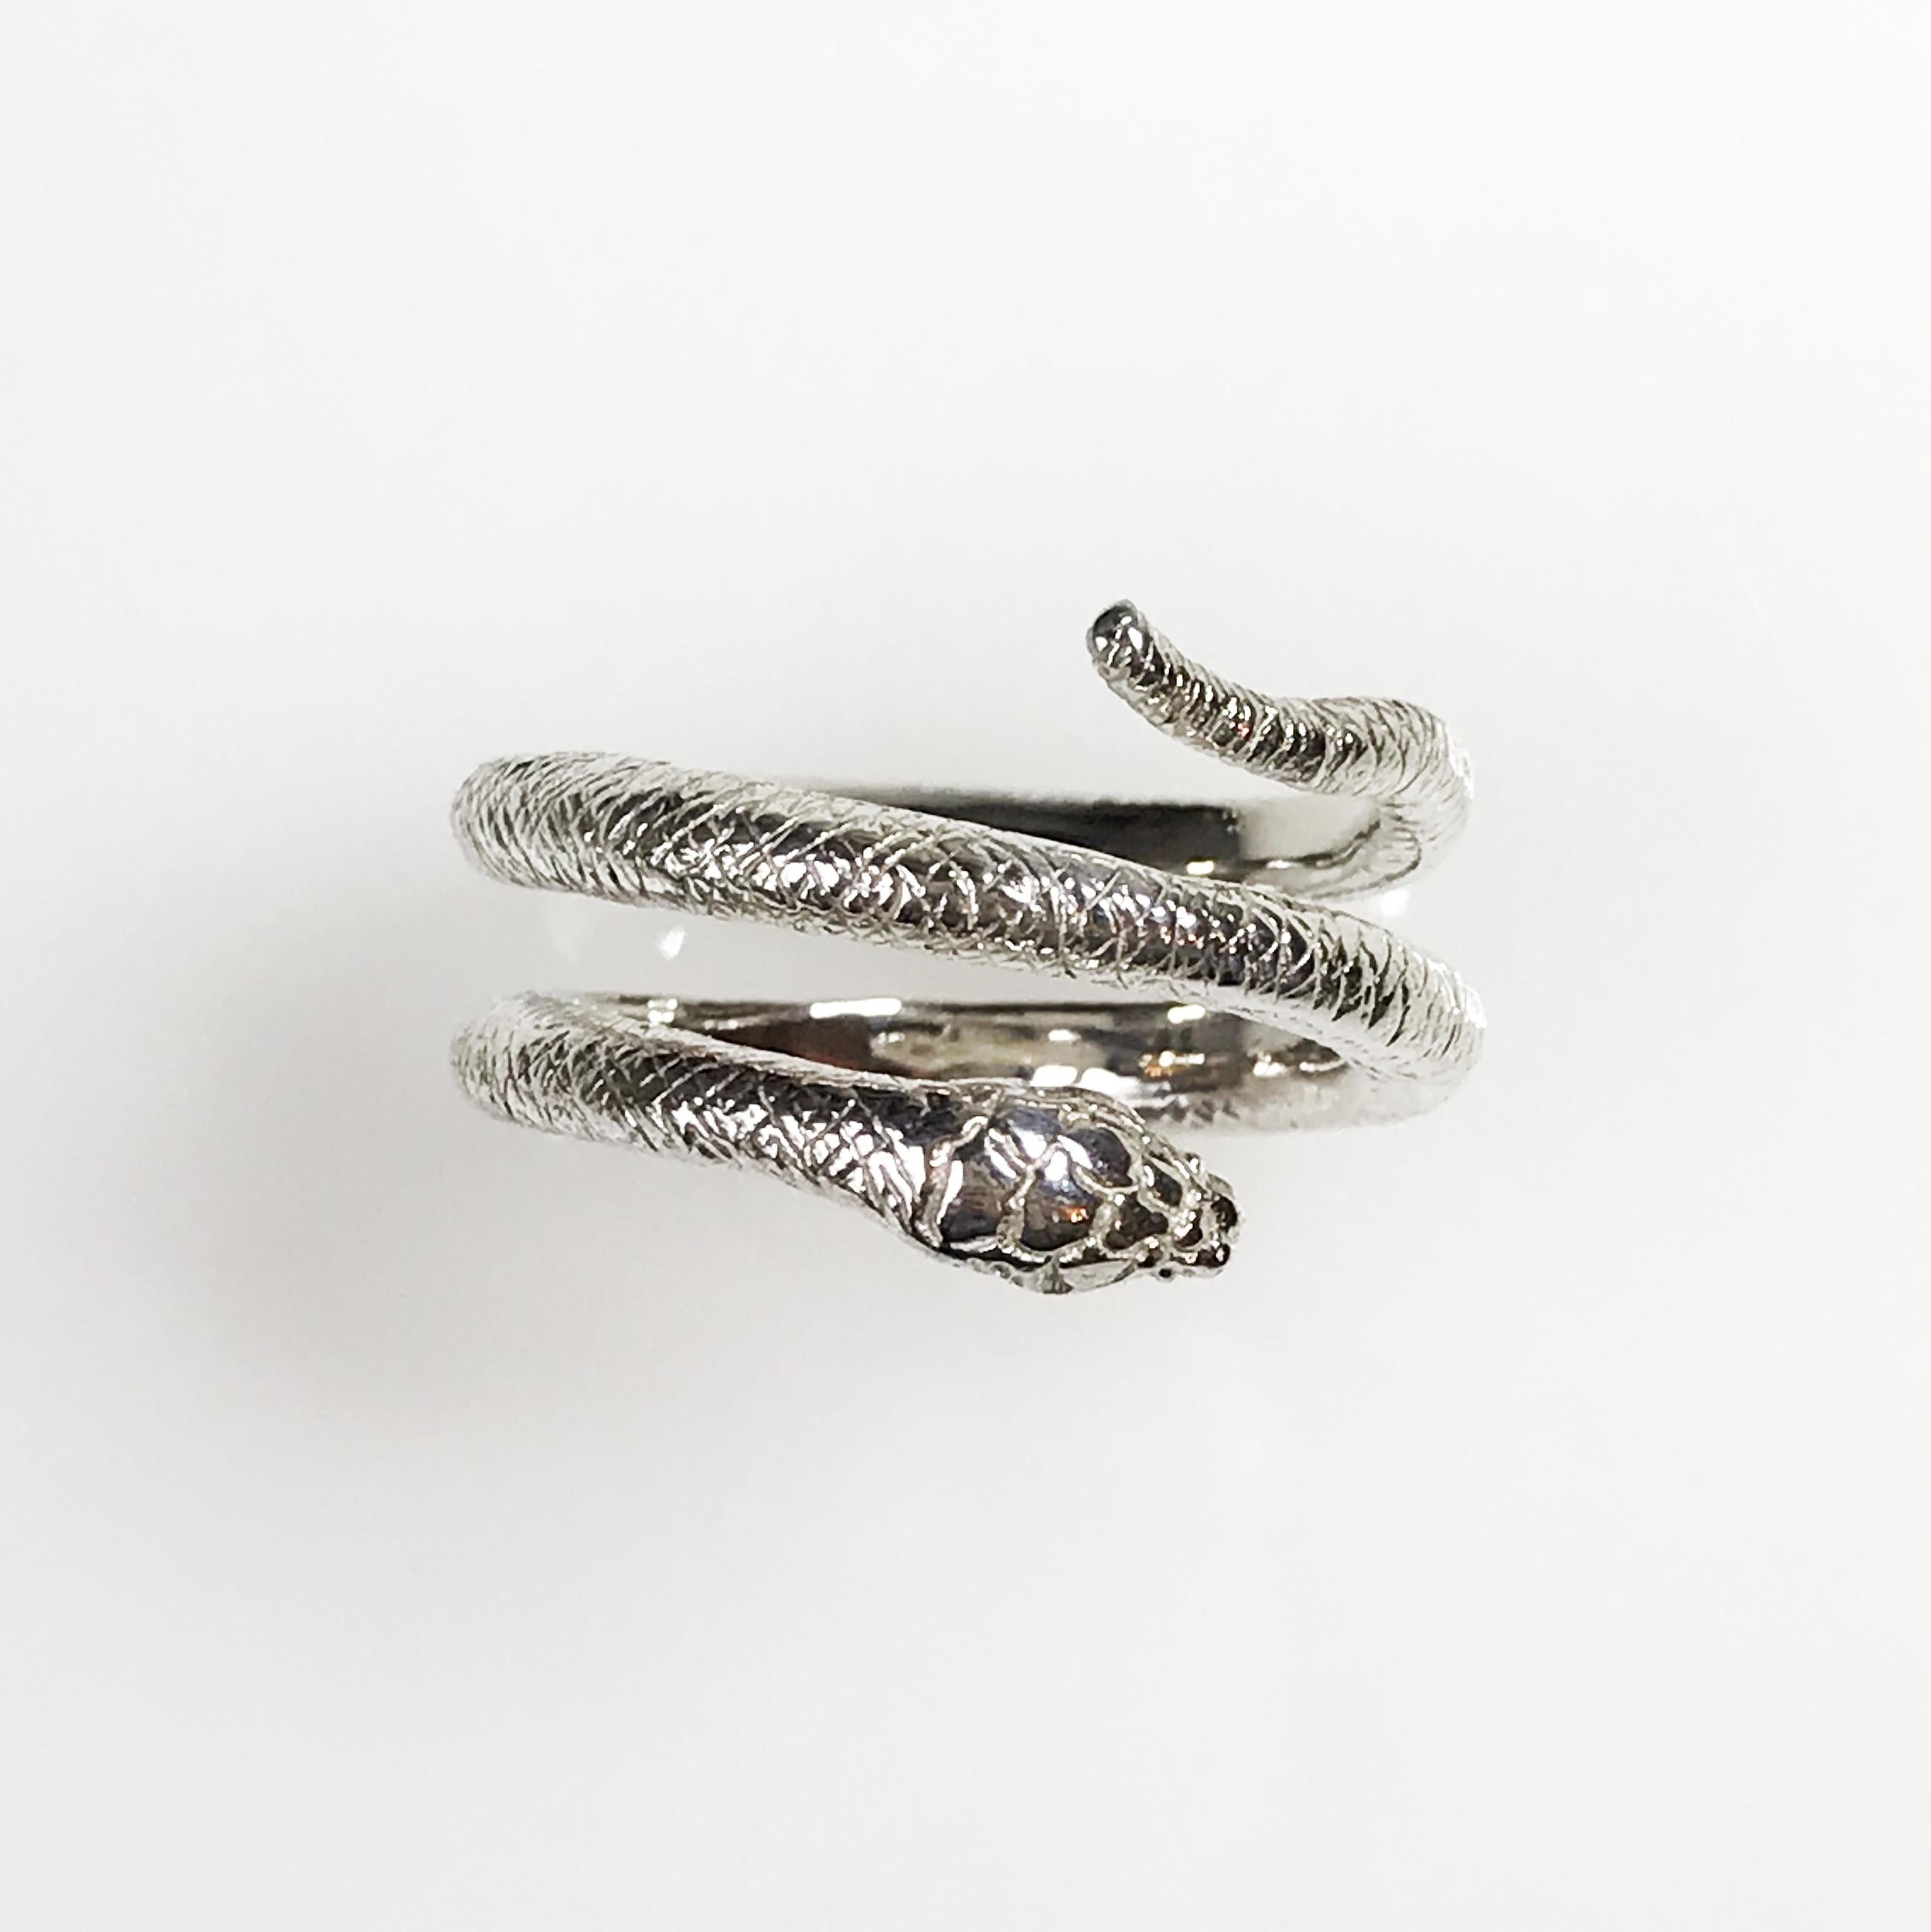 Egyptian Wadjet Elder Coiled Snake Ring in Sterling Silver In New Condition For Sale In London, GB